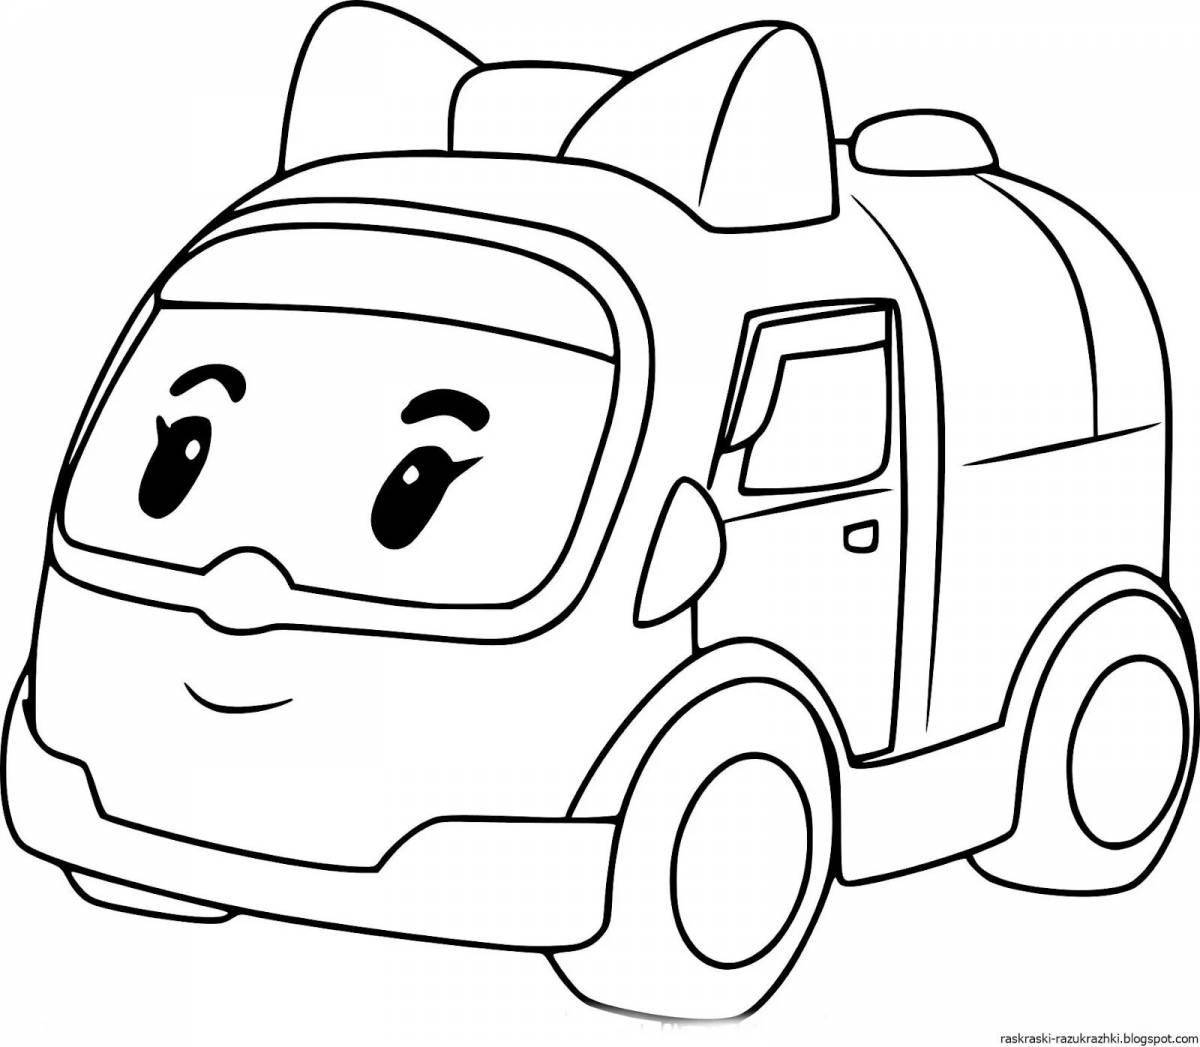 Amazing smart car coloring page